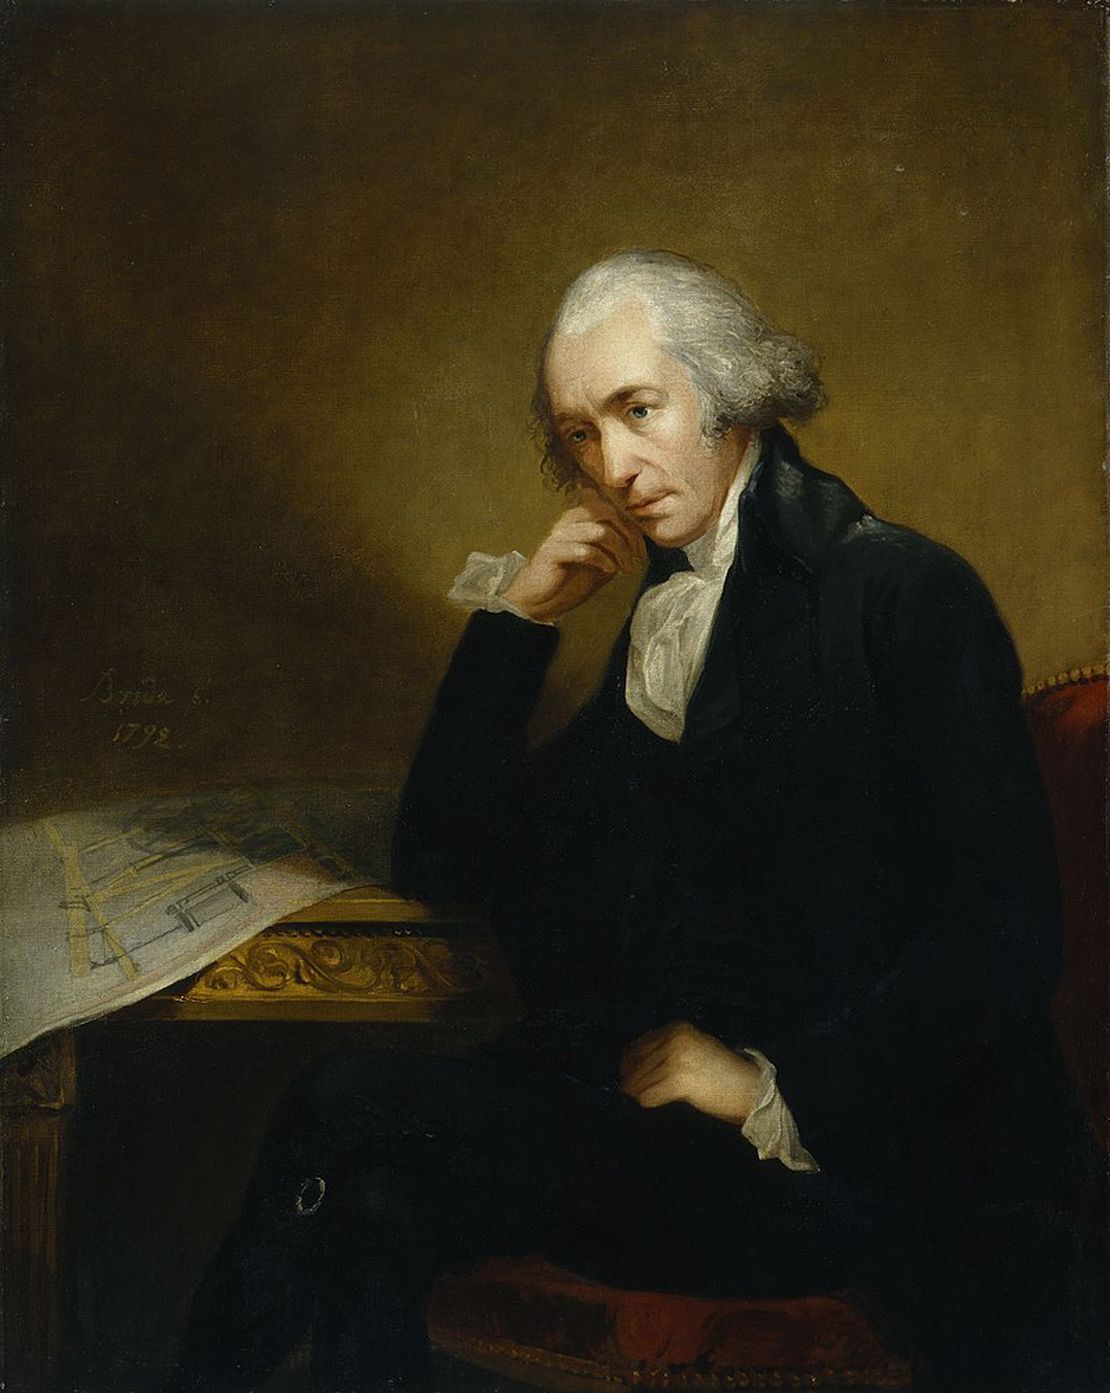 The firm of James Watt and Co was established to manufacture the worlds first duplicating machines.